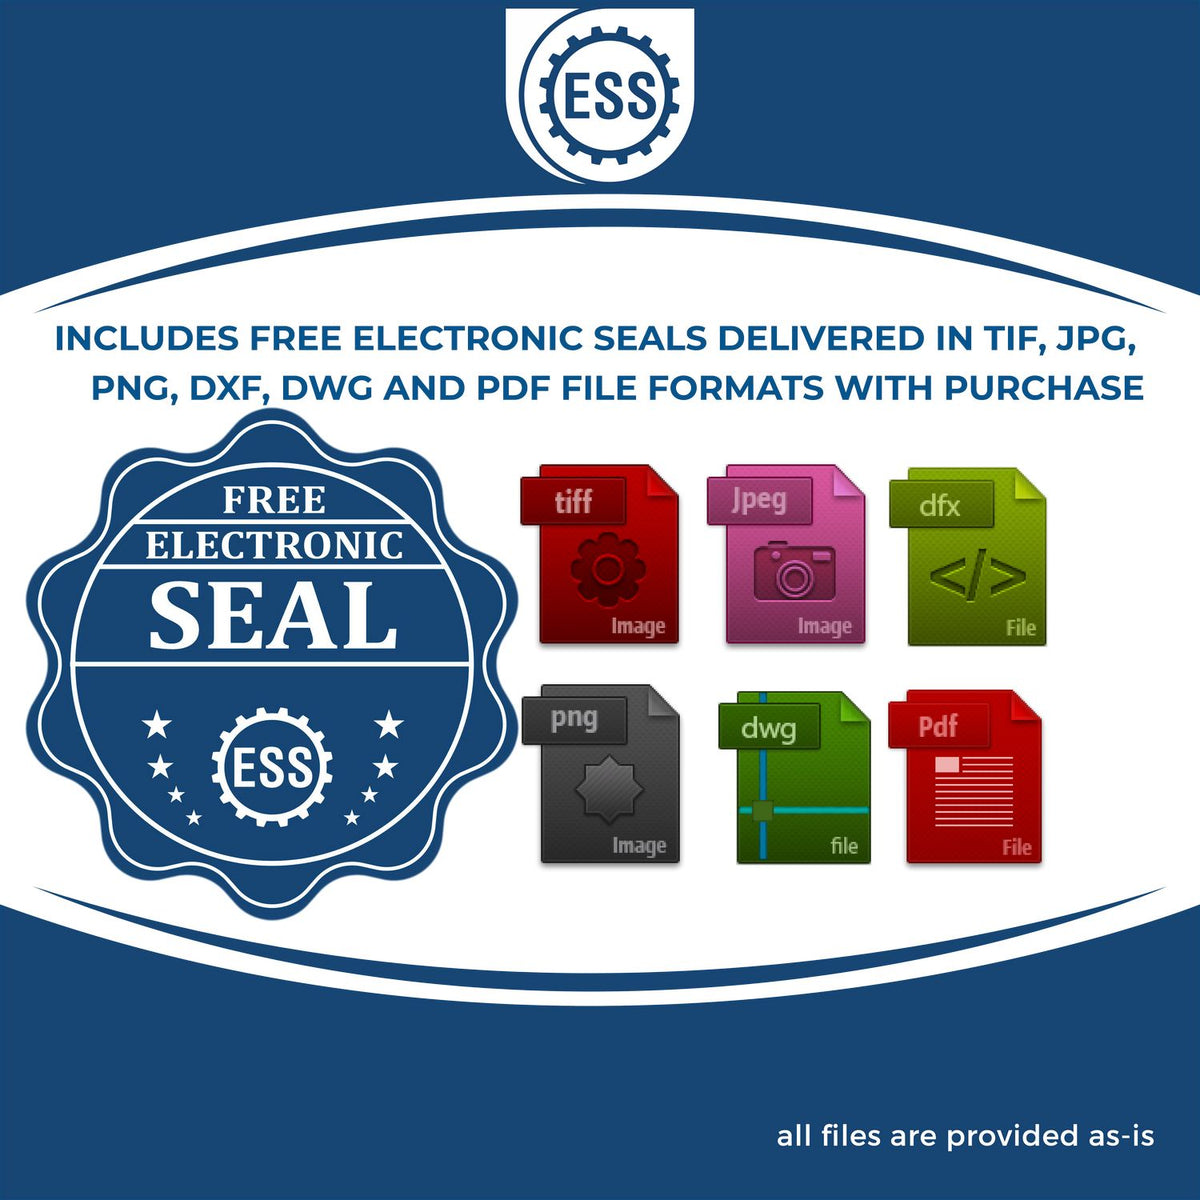 An infographic for the free electronic seal for the Long Reach New Hampshire PE Seal illustrating the different file type icons such as DXF, DWG, TIF, JPG and PNG.